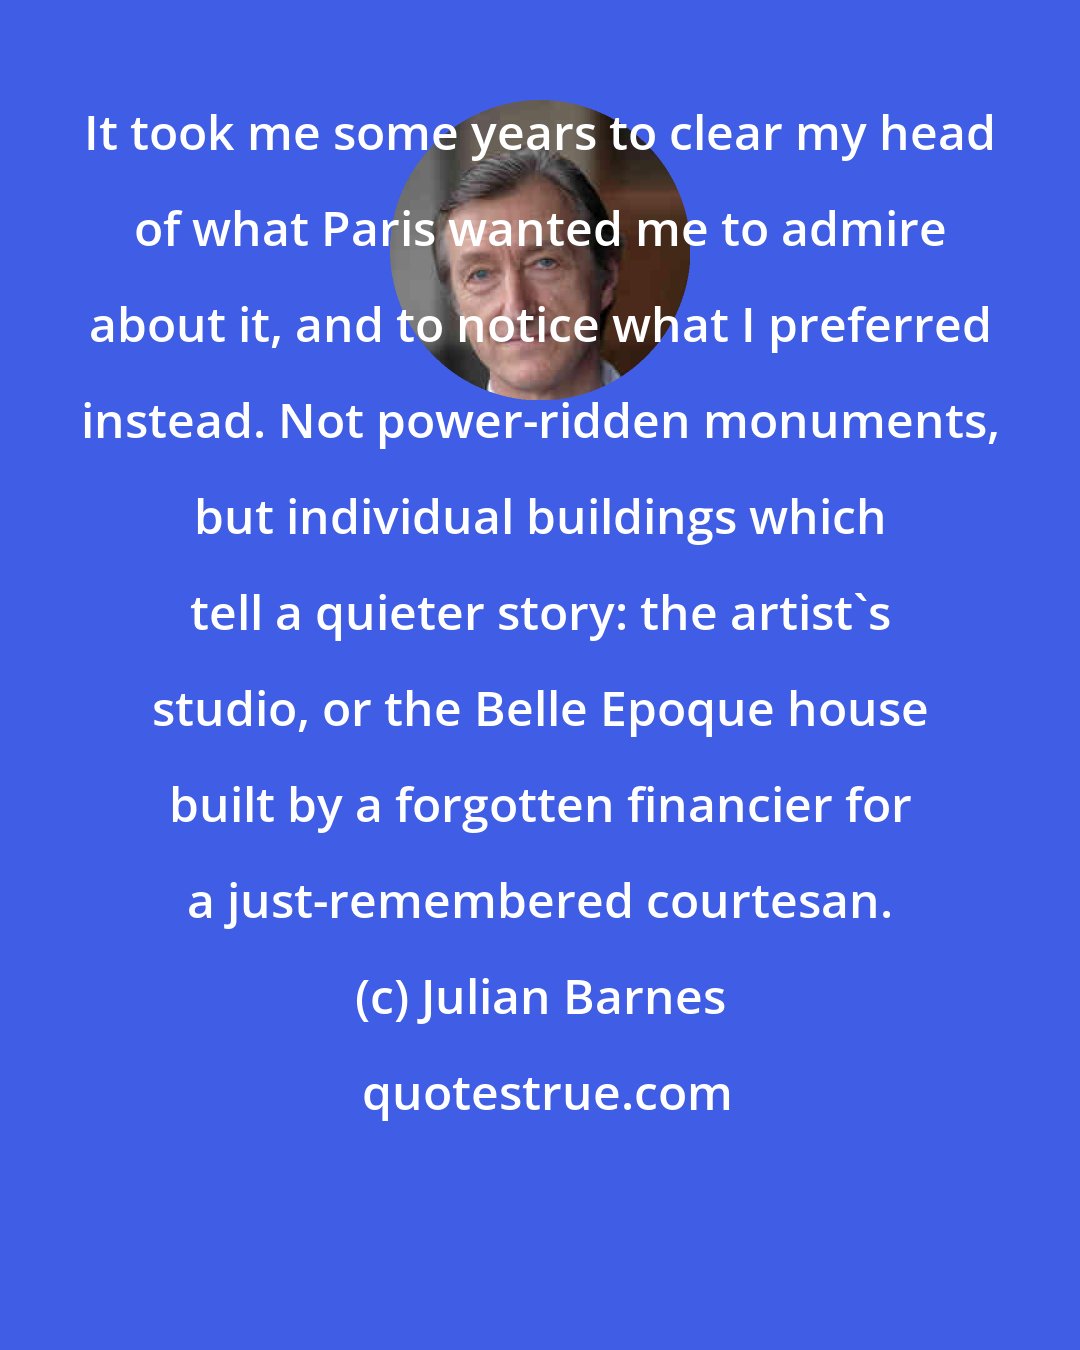 Julian Barnes: It took me some years to clear my head of what Paris wanted me to admire about it, and to notice what I preferred instead. Not power-ridden monuments, but individual buildings which tell a quieter story: the artist's studio, or the Belle Epoque house built by a forgotten financier for a just-remembered courtesan.